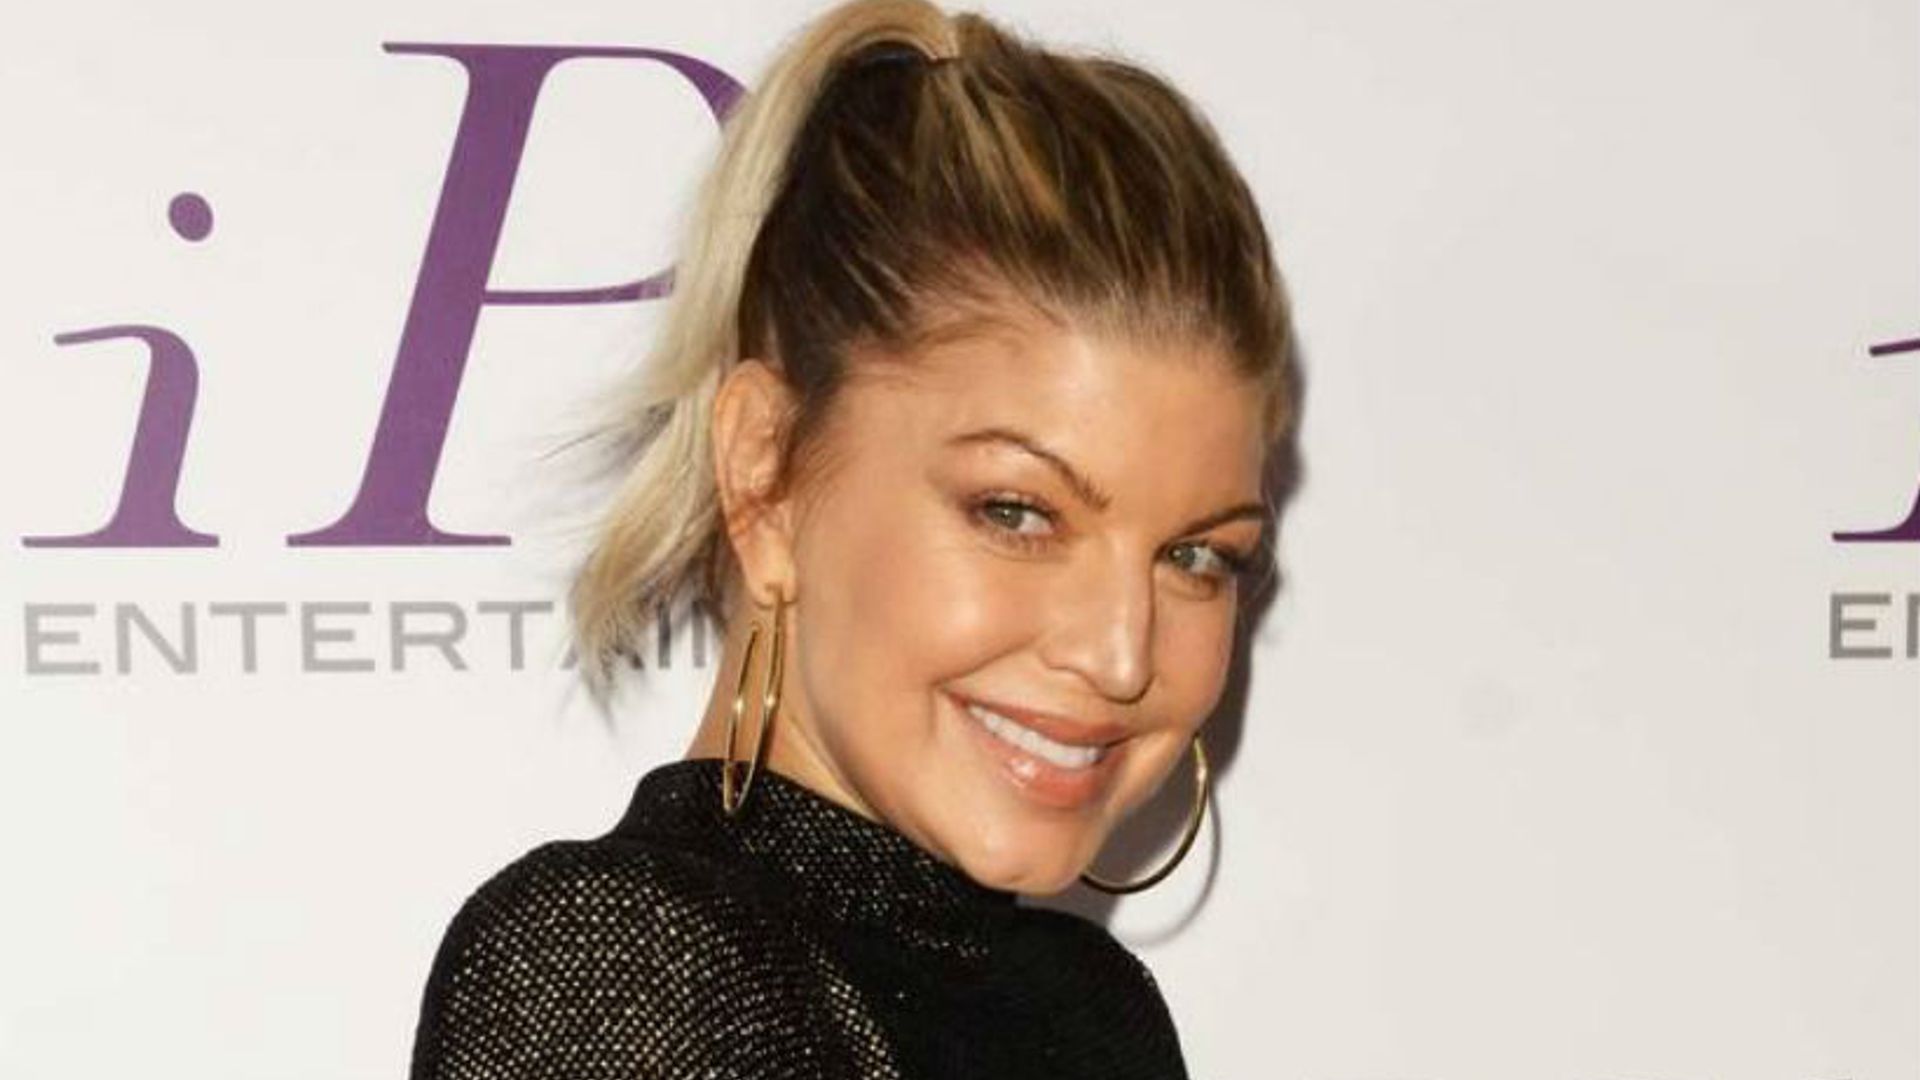 Fergie talks about why she isn't afraid to take fashion risks